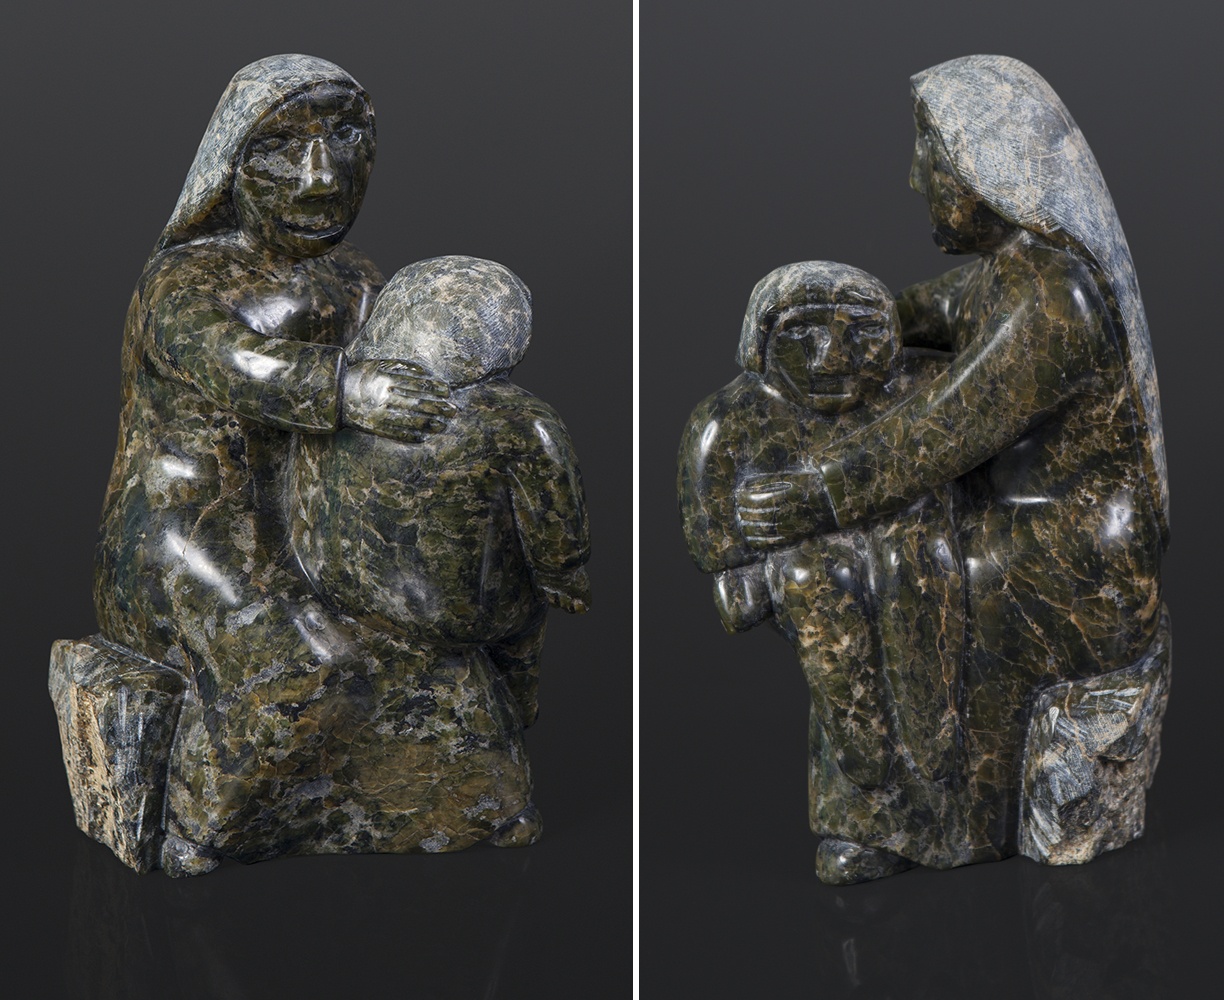 Sitting On Her Knee Oviloo Tunnillie, RCA Inuit (1949 - 2014) Serpentine 12" x 8" x 7"